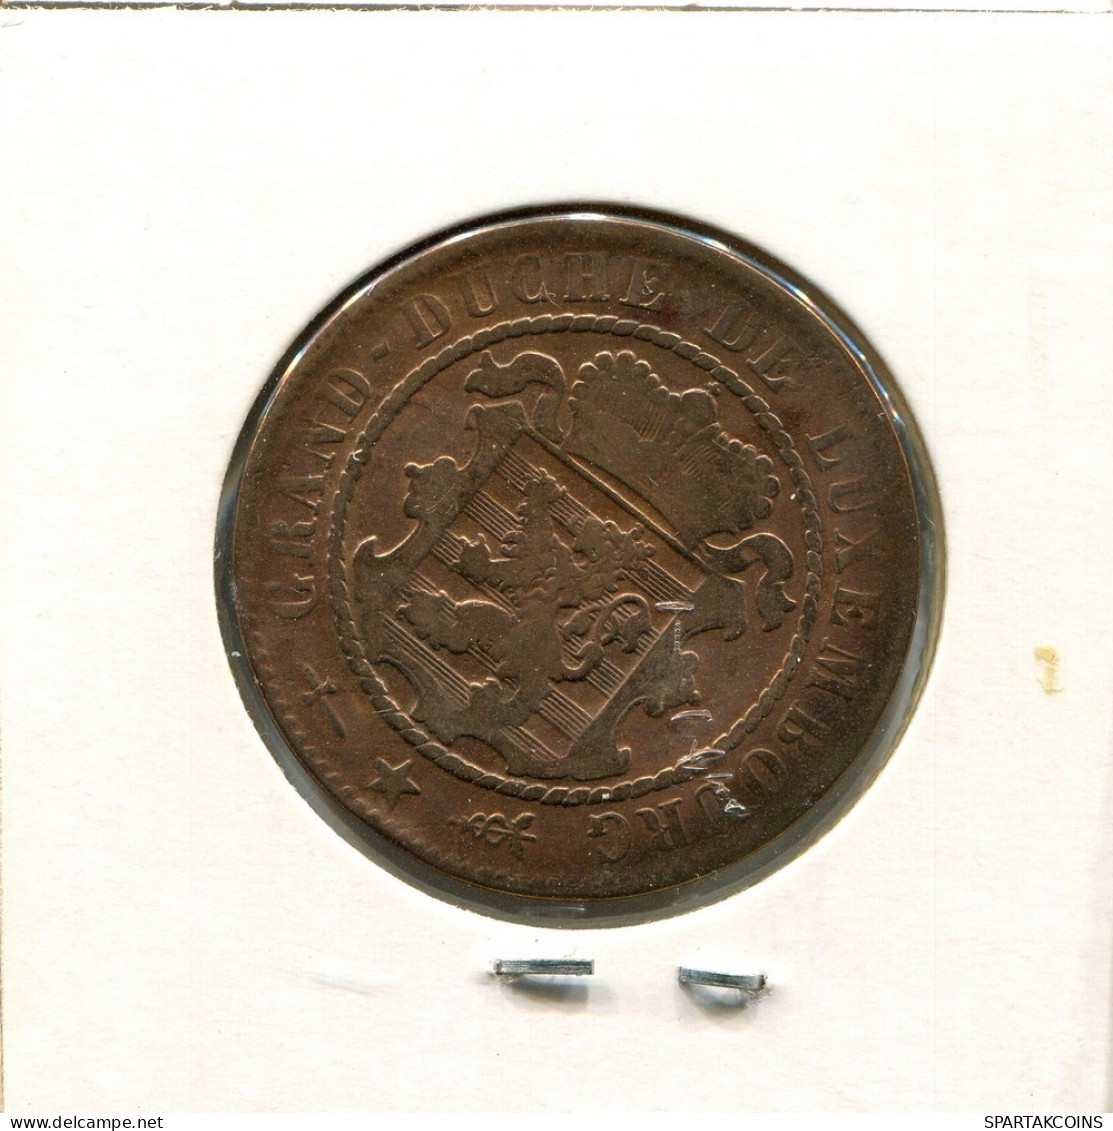 10 CENTIMES 1870 LUXEMBURG LUXEMBOURG Münze #AT180.D.A - Luxemburg